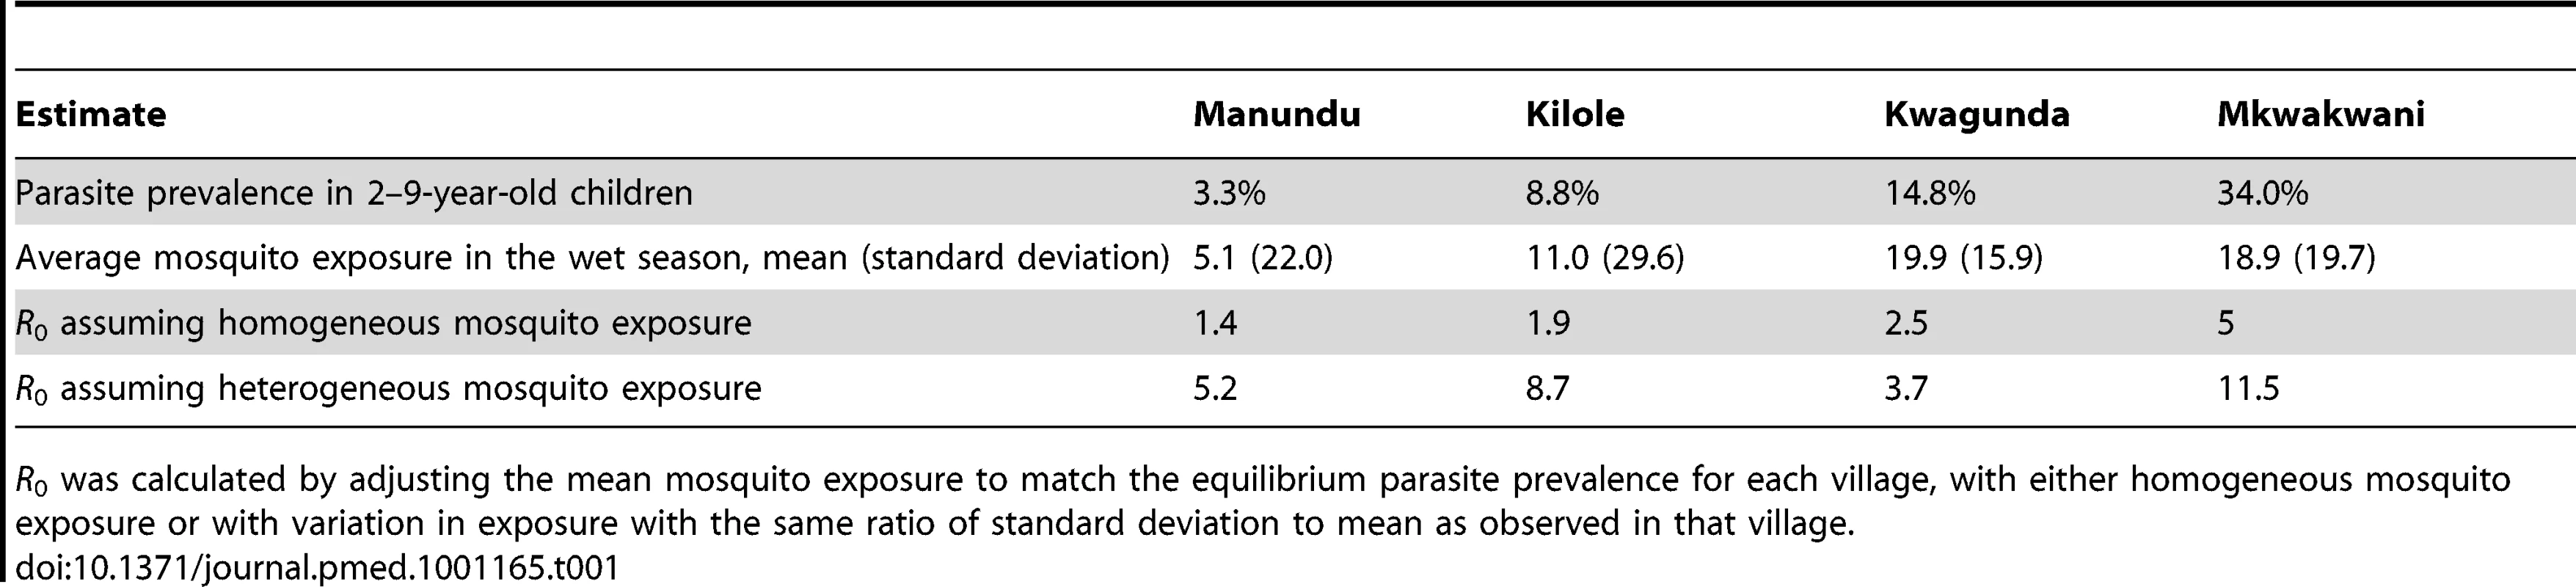 Estimates of the basic reproductive number (<i>R</i><sub>0</sub>) for a given parasite prevalence and heterogeneous mosquito exposure in four villages in northern Tanzania.